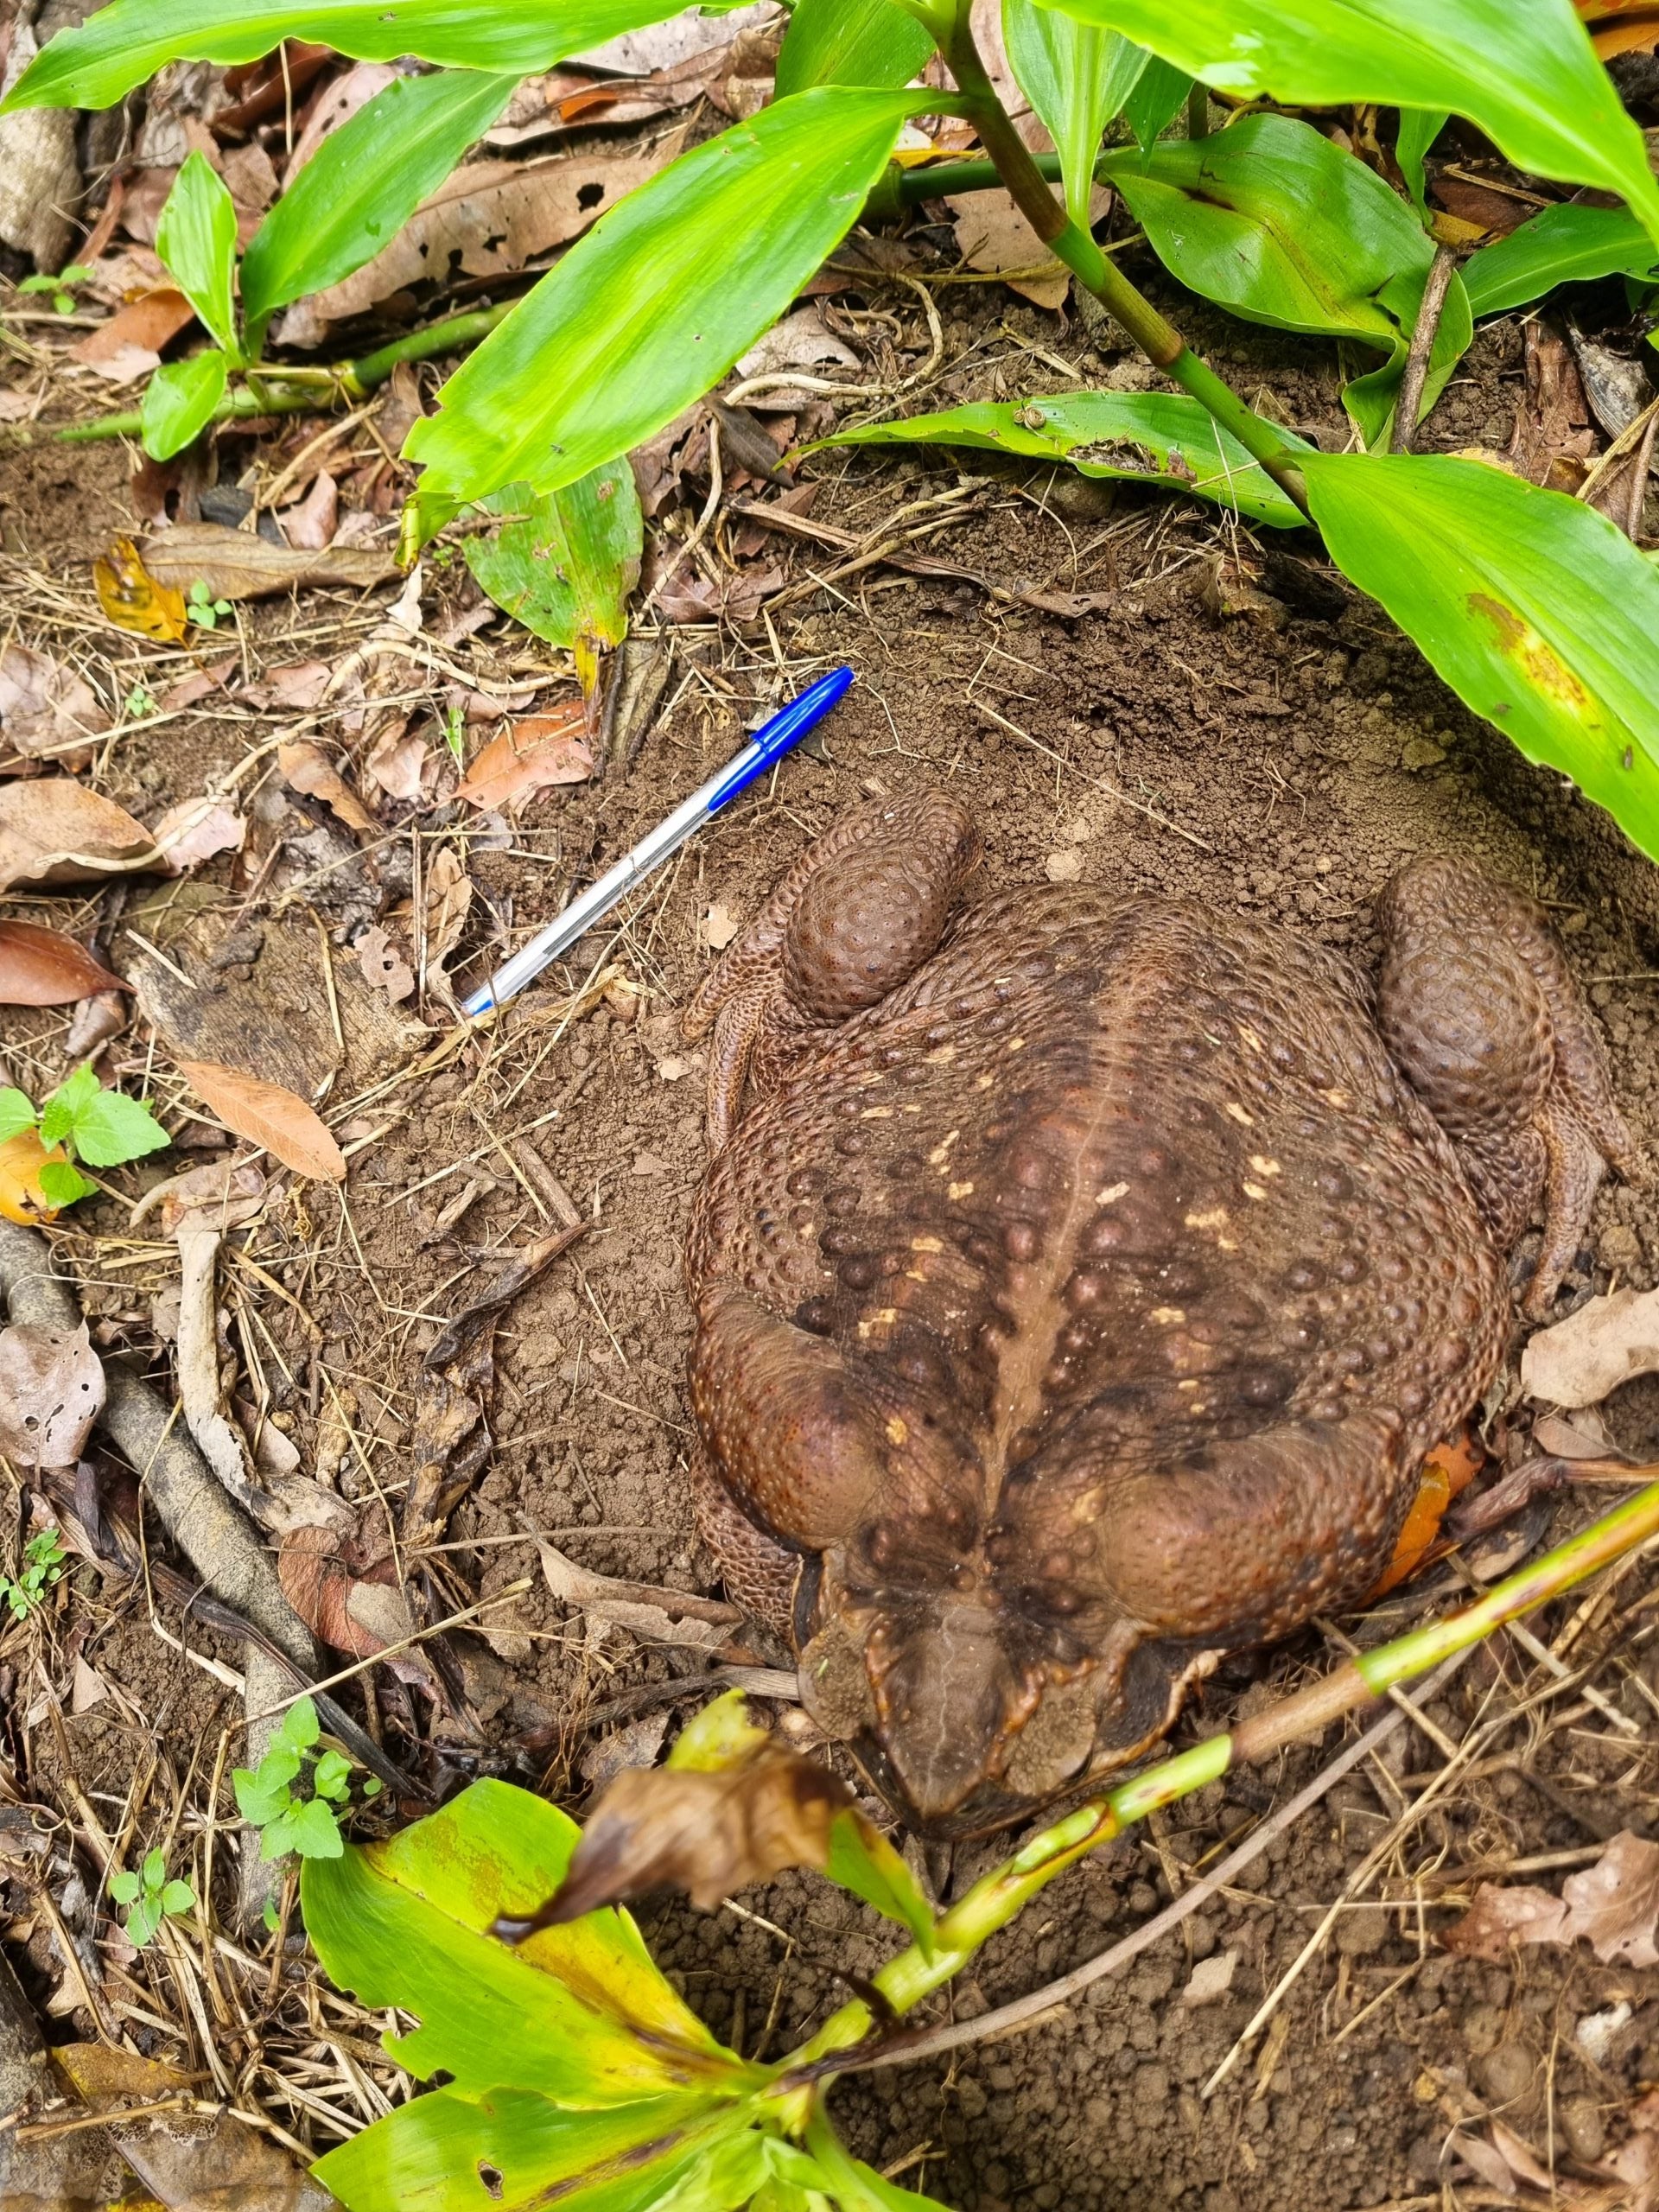 Australian Park Rangers Find Biggest Toad in the World, Then Quickly Euthanize It